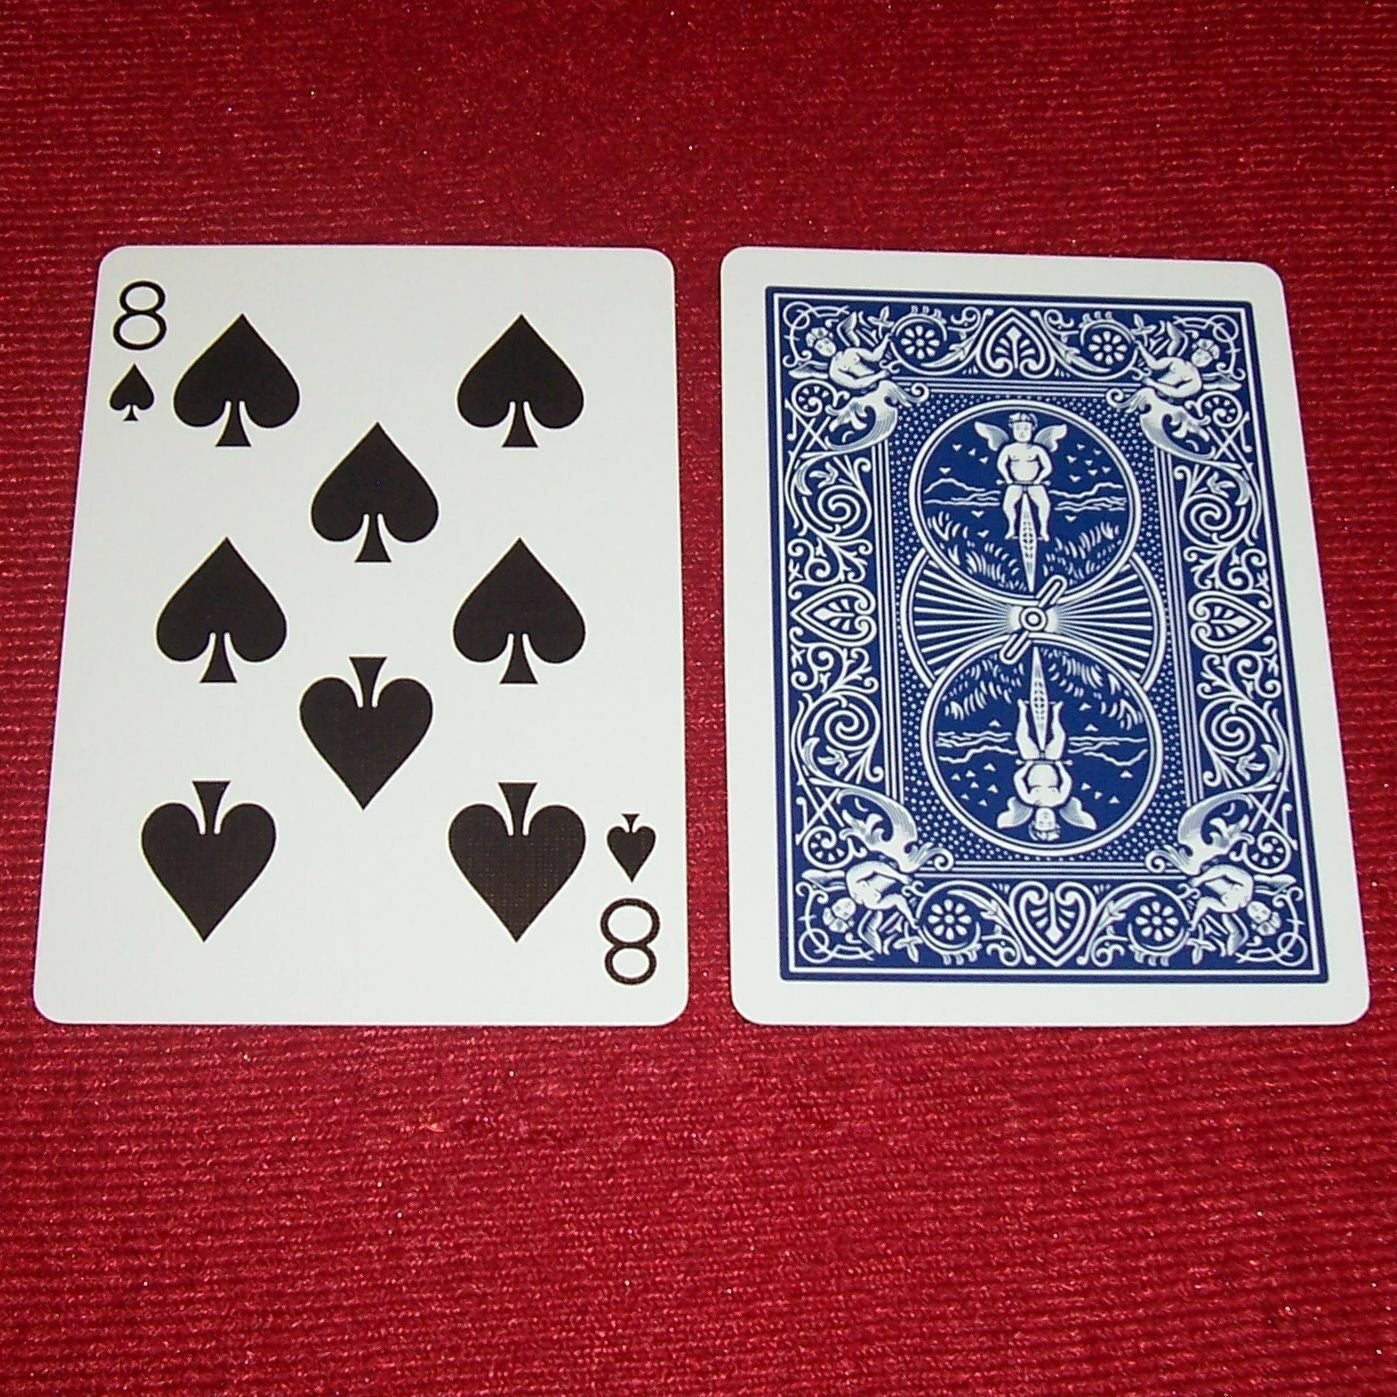 Stutter Deck - Bicycle® Cards - One way forcing deck Blue Backed